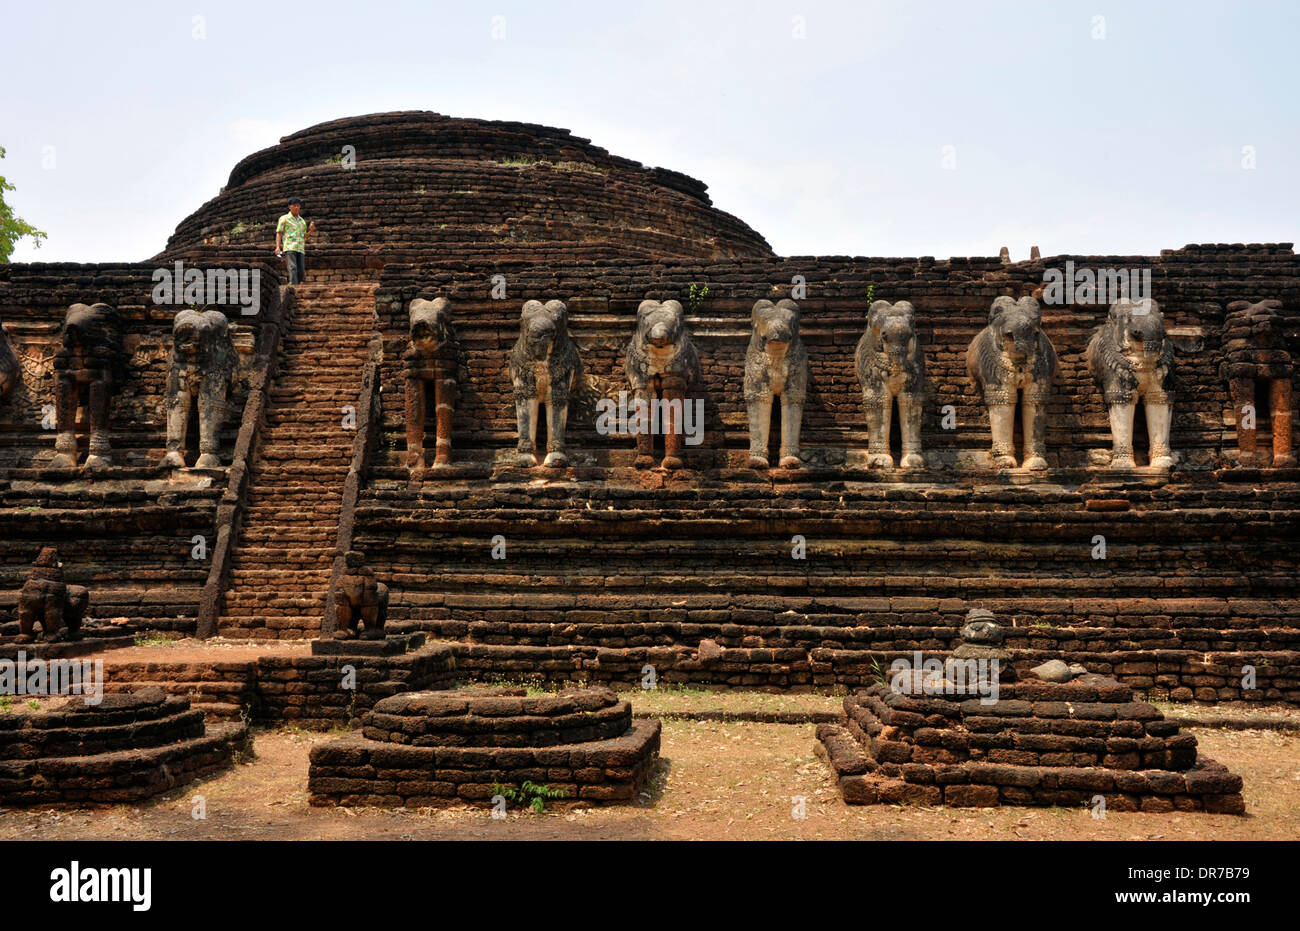 Palace ruins adorned with elephant statues at Kamphaeng Phet in Thailand. Stock Photo